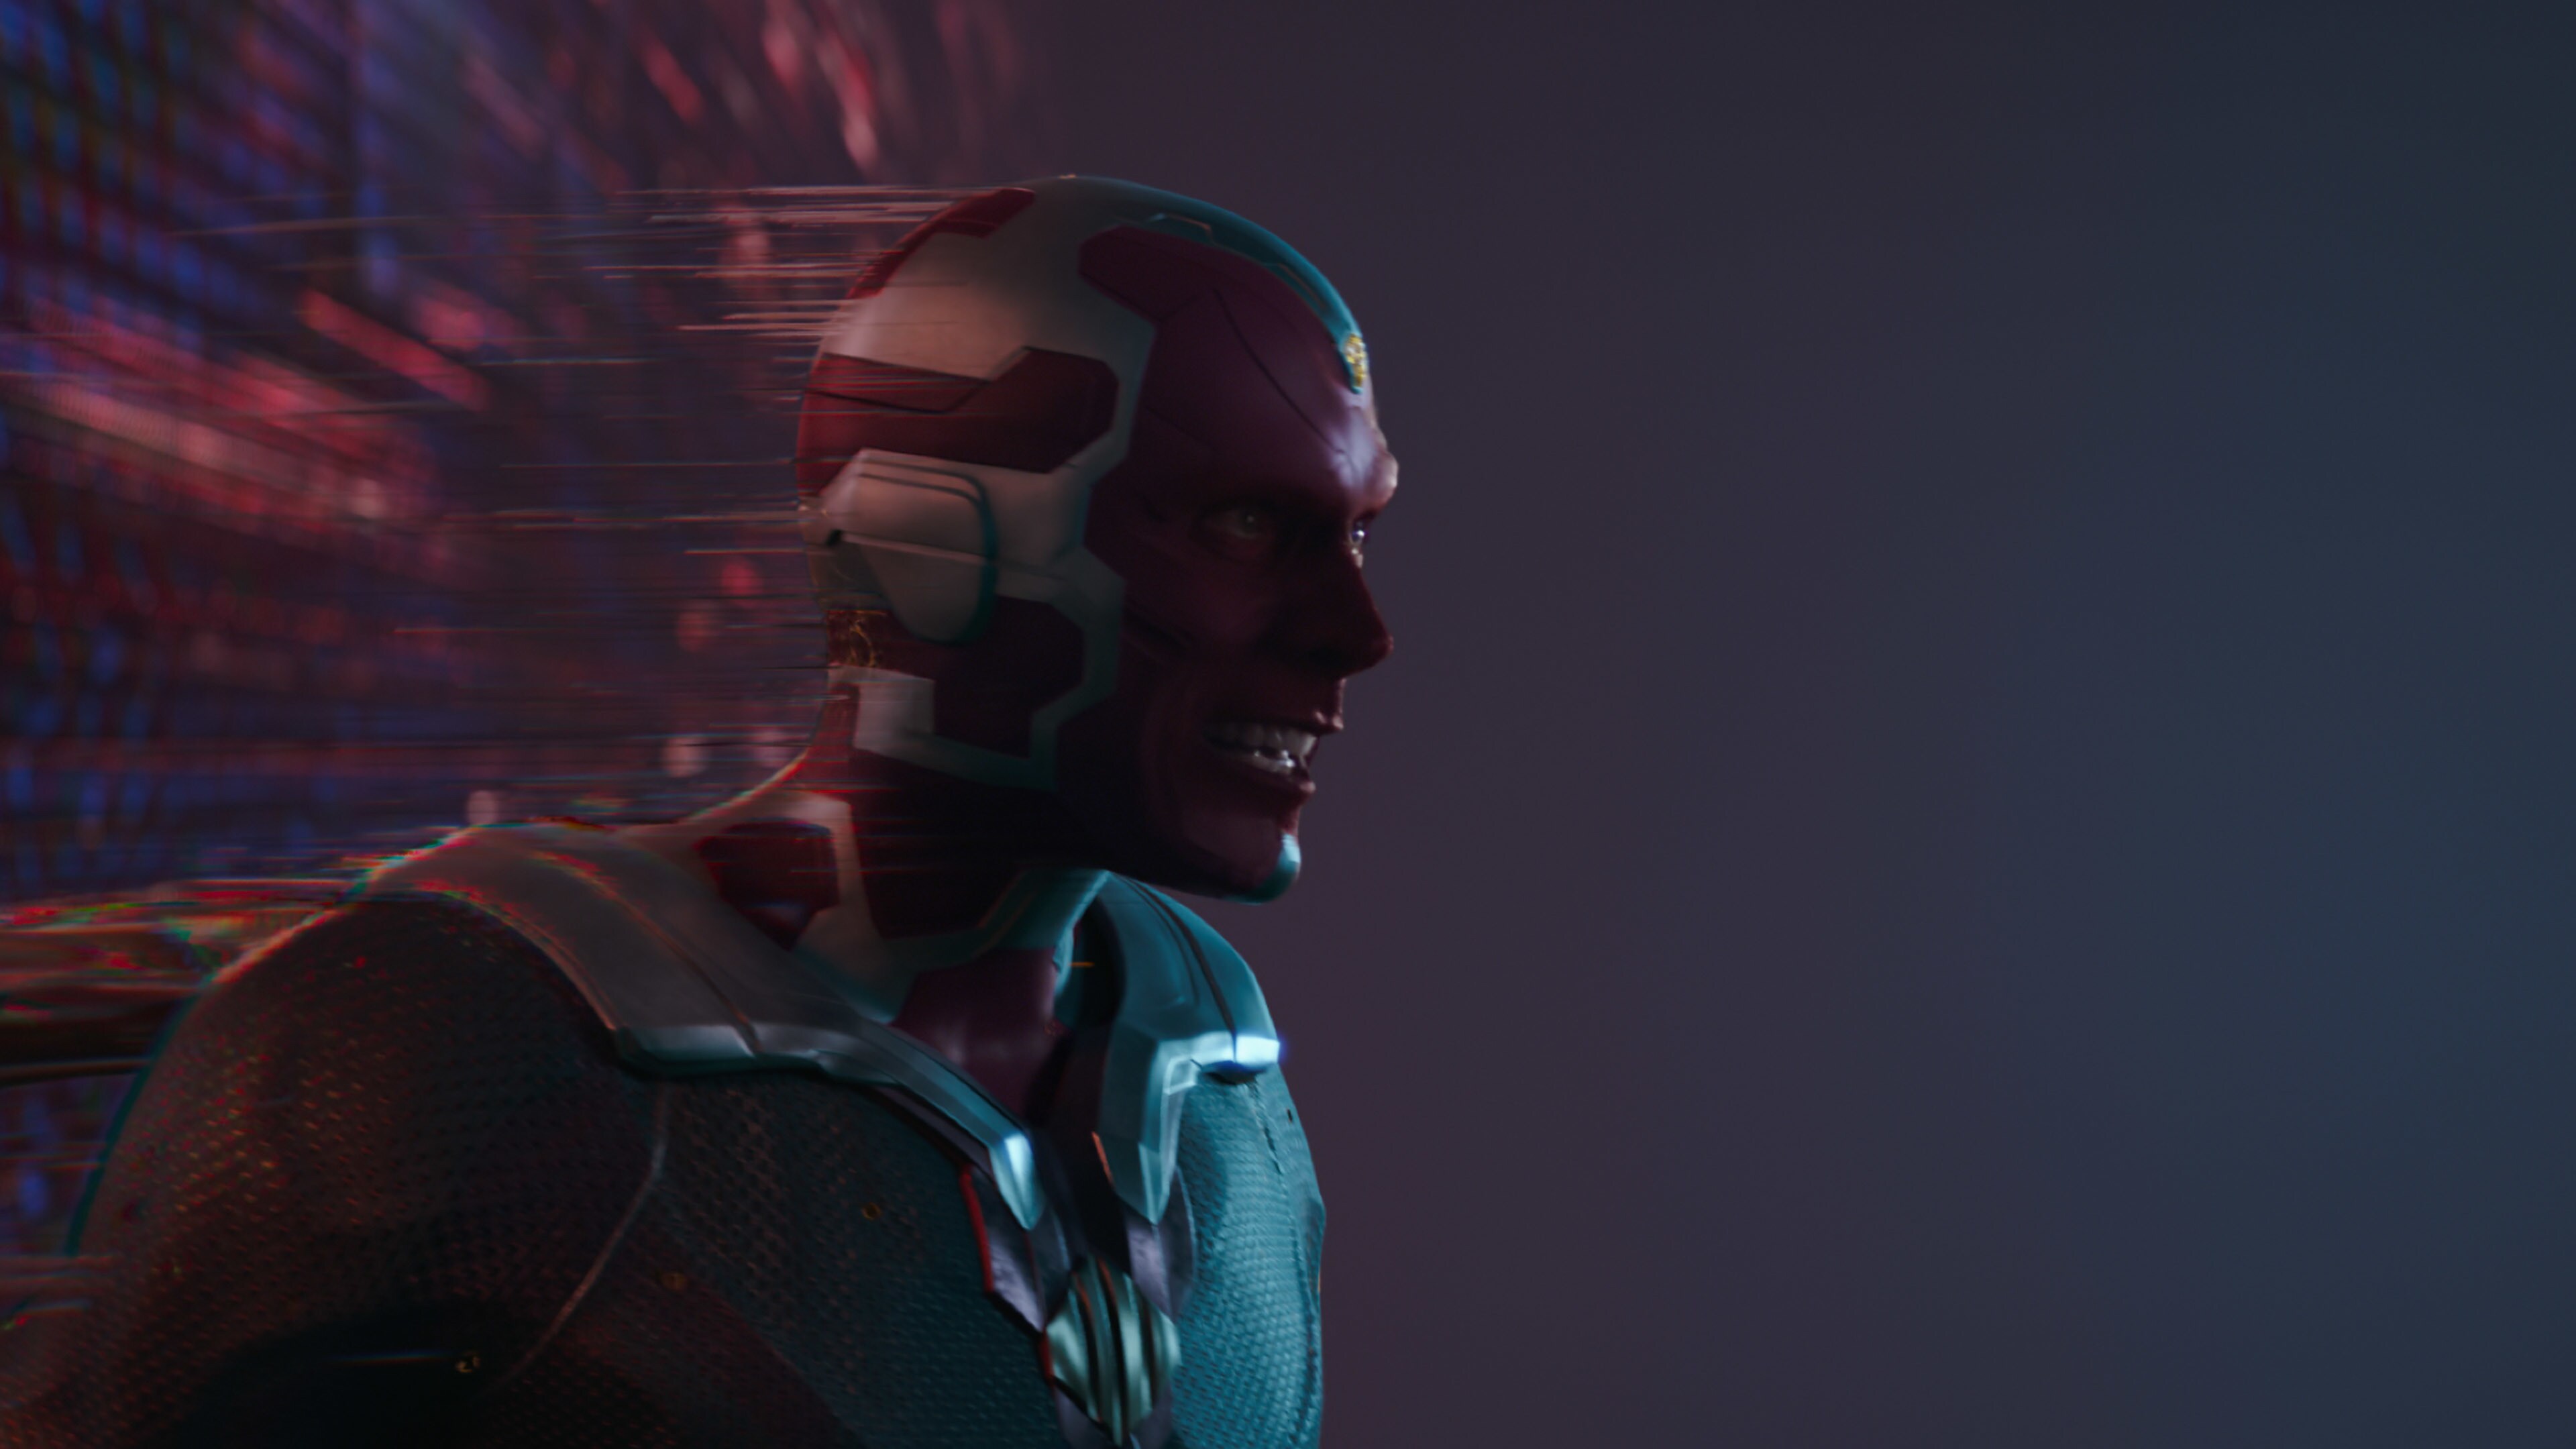 Paul Bettany as Vision in Marvel Studios' WANDAVISION exclusively on Disney+. Photo courtesy of Marvel Studios. ©Marvel Studios 2021. All Rights Reserved.